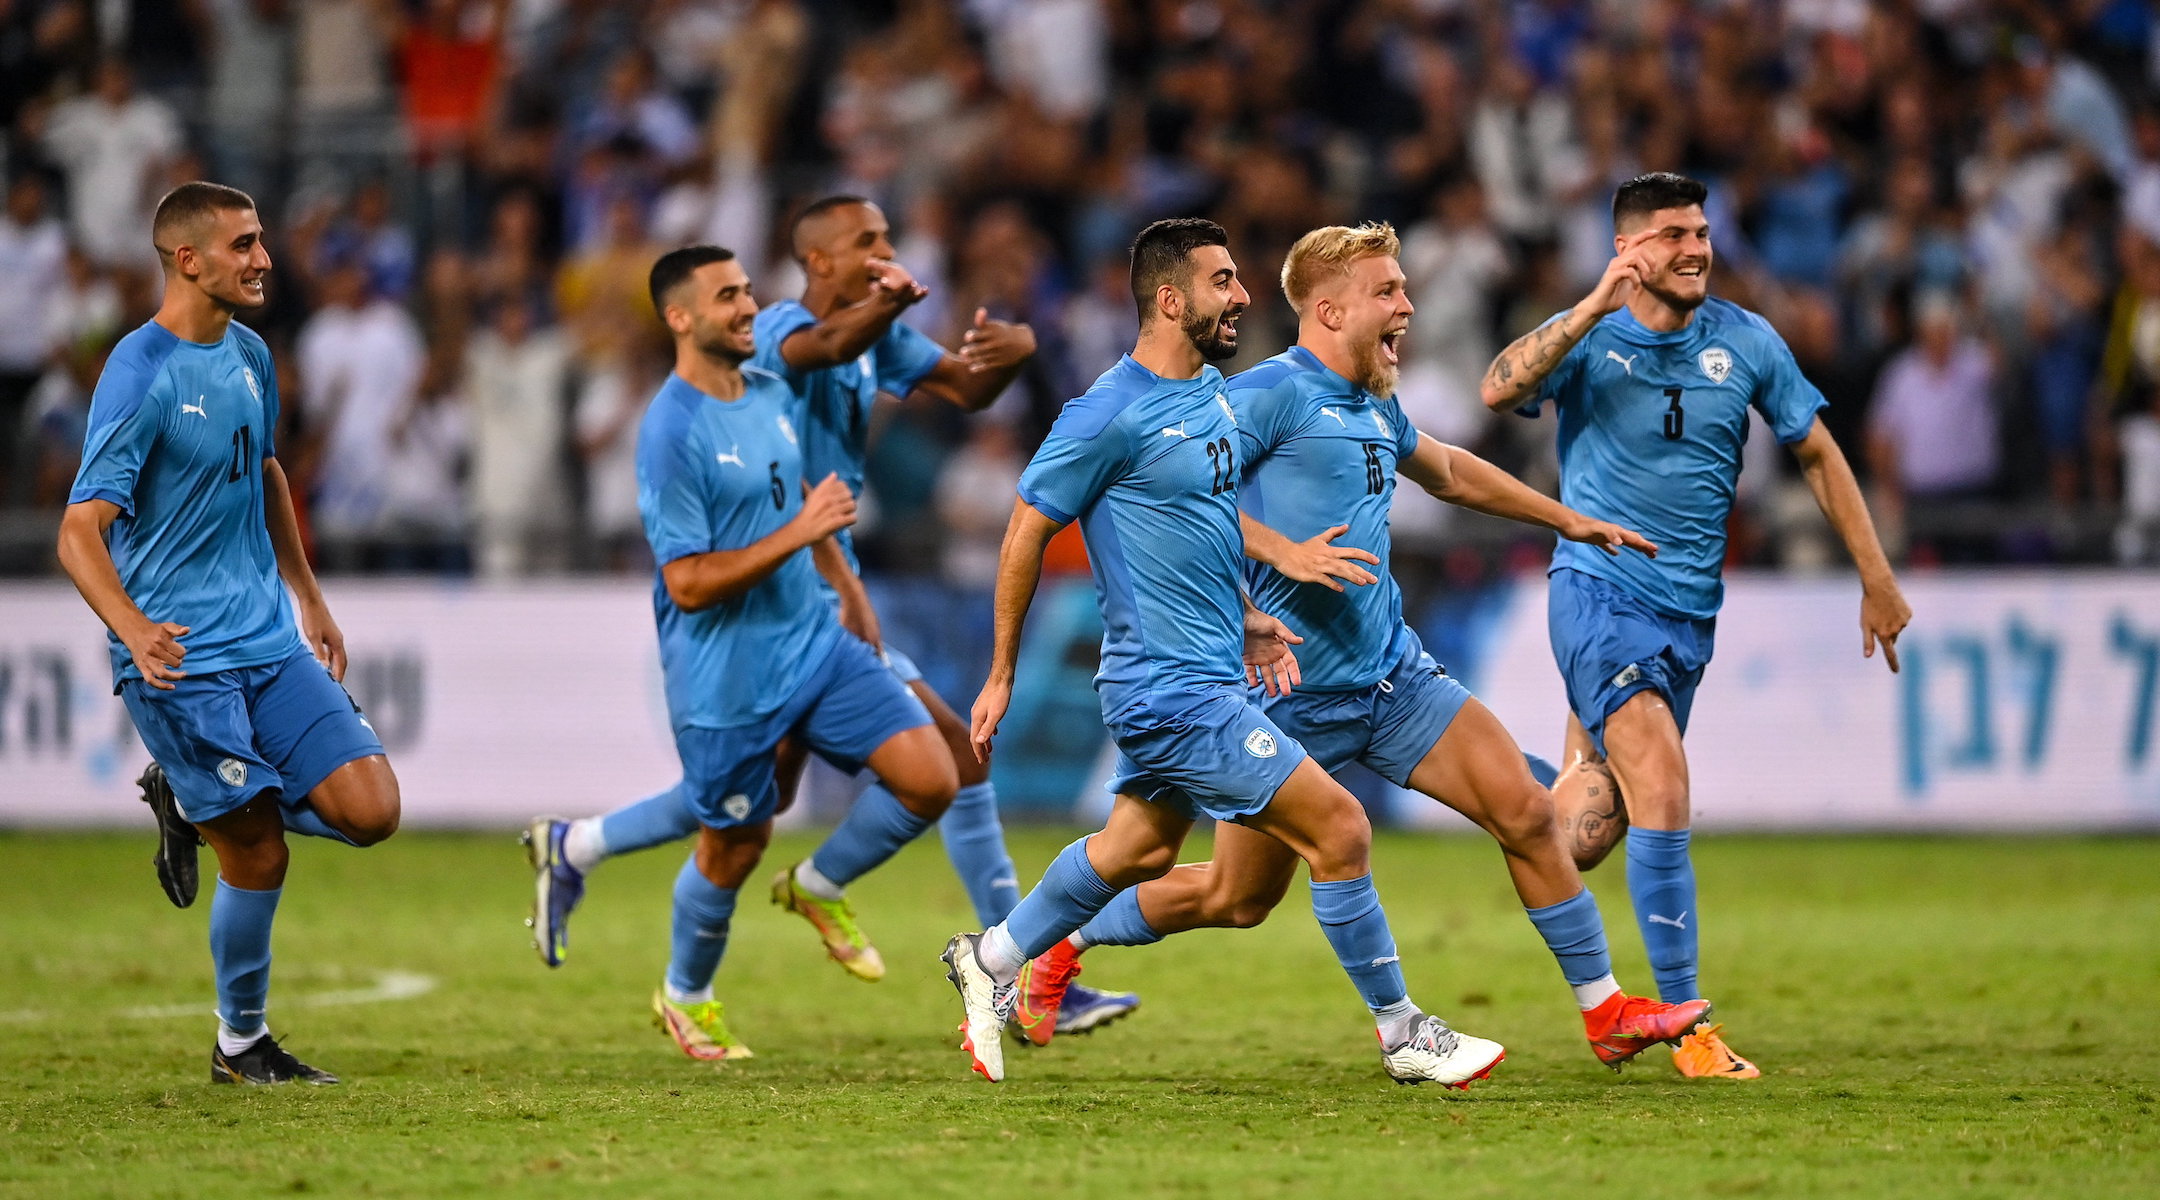 Israeli players on the country’s under-21 team celebrate a victory in the UEFA European U21 Championship playoff round against the Republic of Ireland at Bloomfield Stadium in Tel Aviv, Sept. 27, 2022. (Seb Daly/Sportsfile via Getty Images)